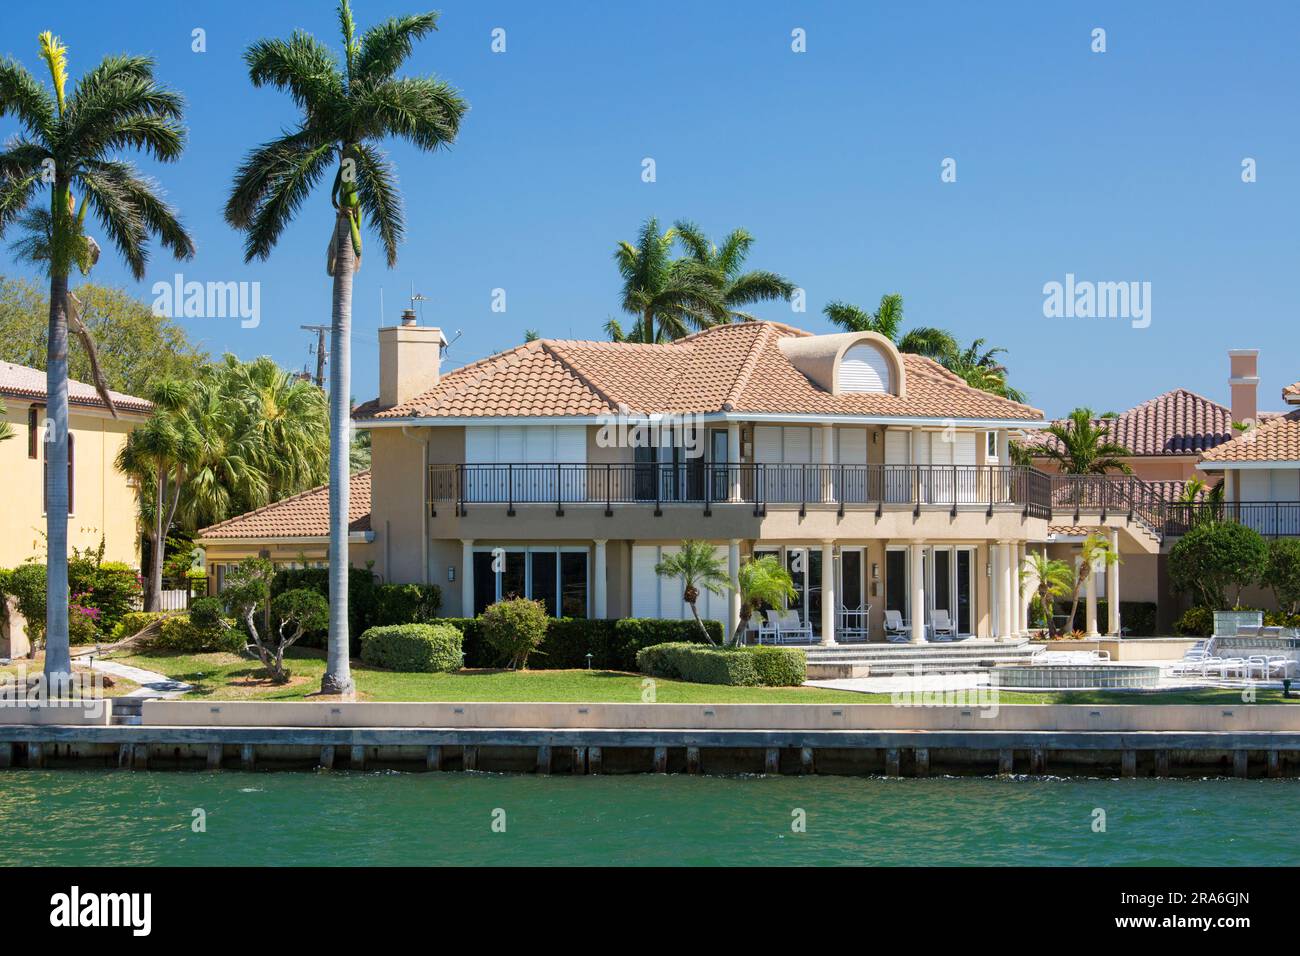 Fort Lauderdale, Florida, USA. Luxury waterfront mansion overlooking the New River and Stranahan River, Harbor Beach district. Stock Photo